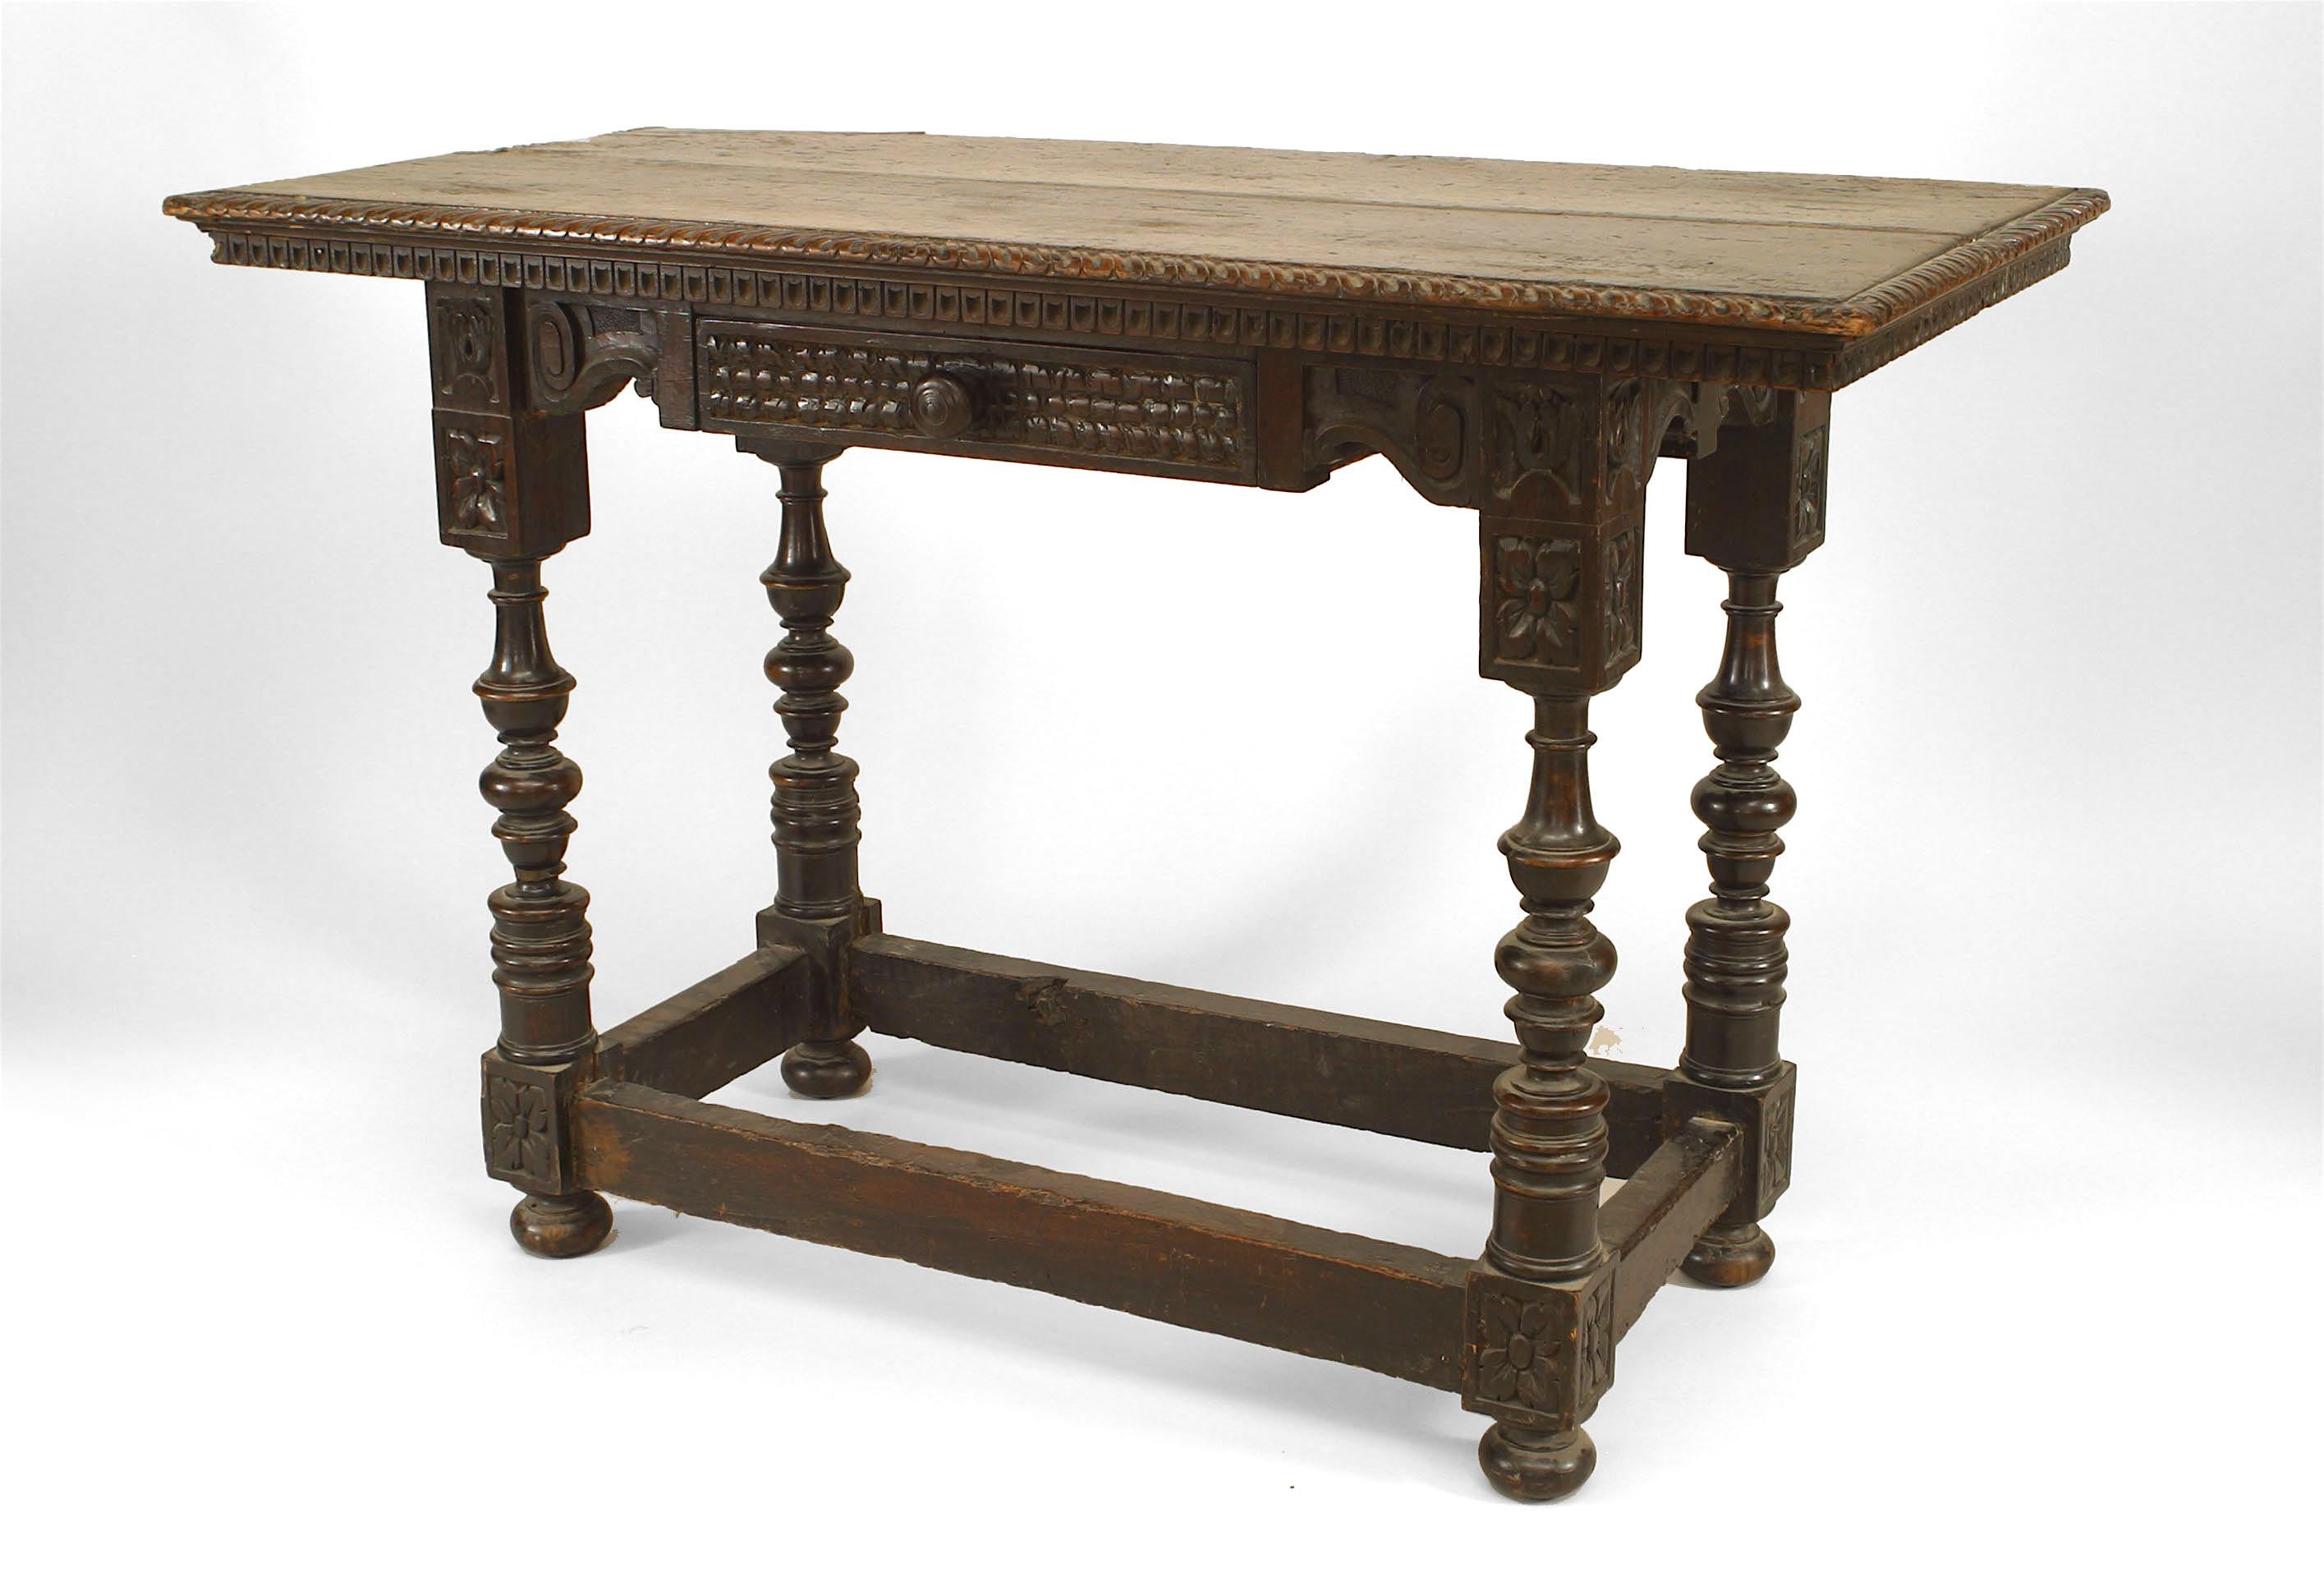 English Renaissance-style (19th Century) walnut carved console table with drawer and stretcher on turned legs.
